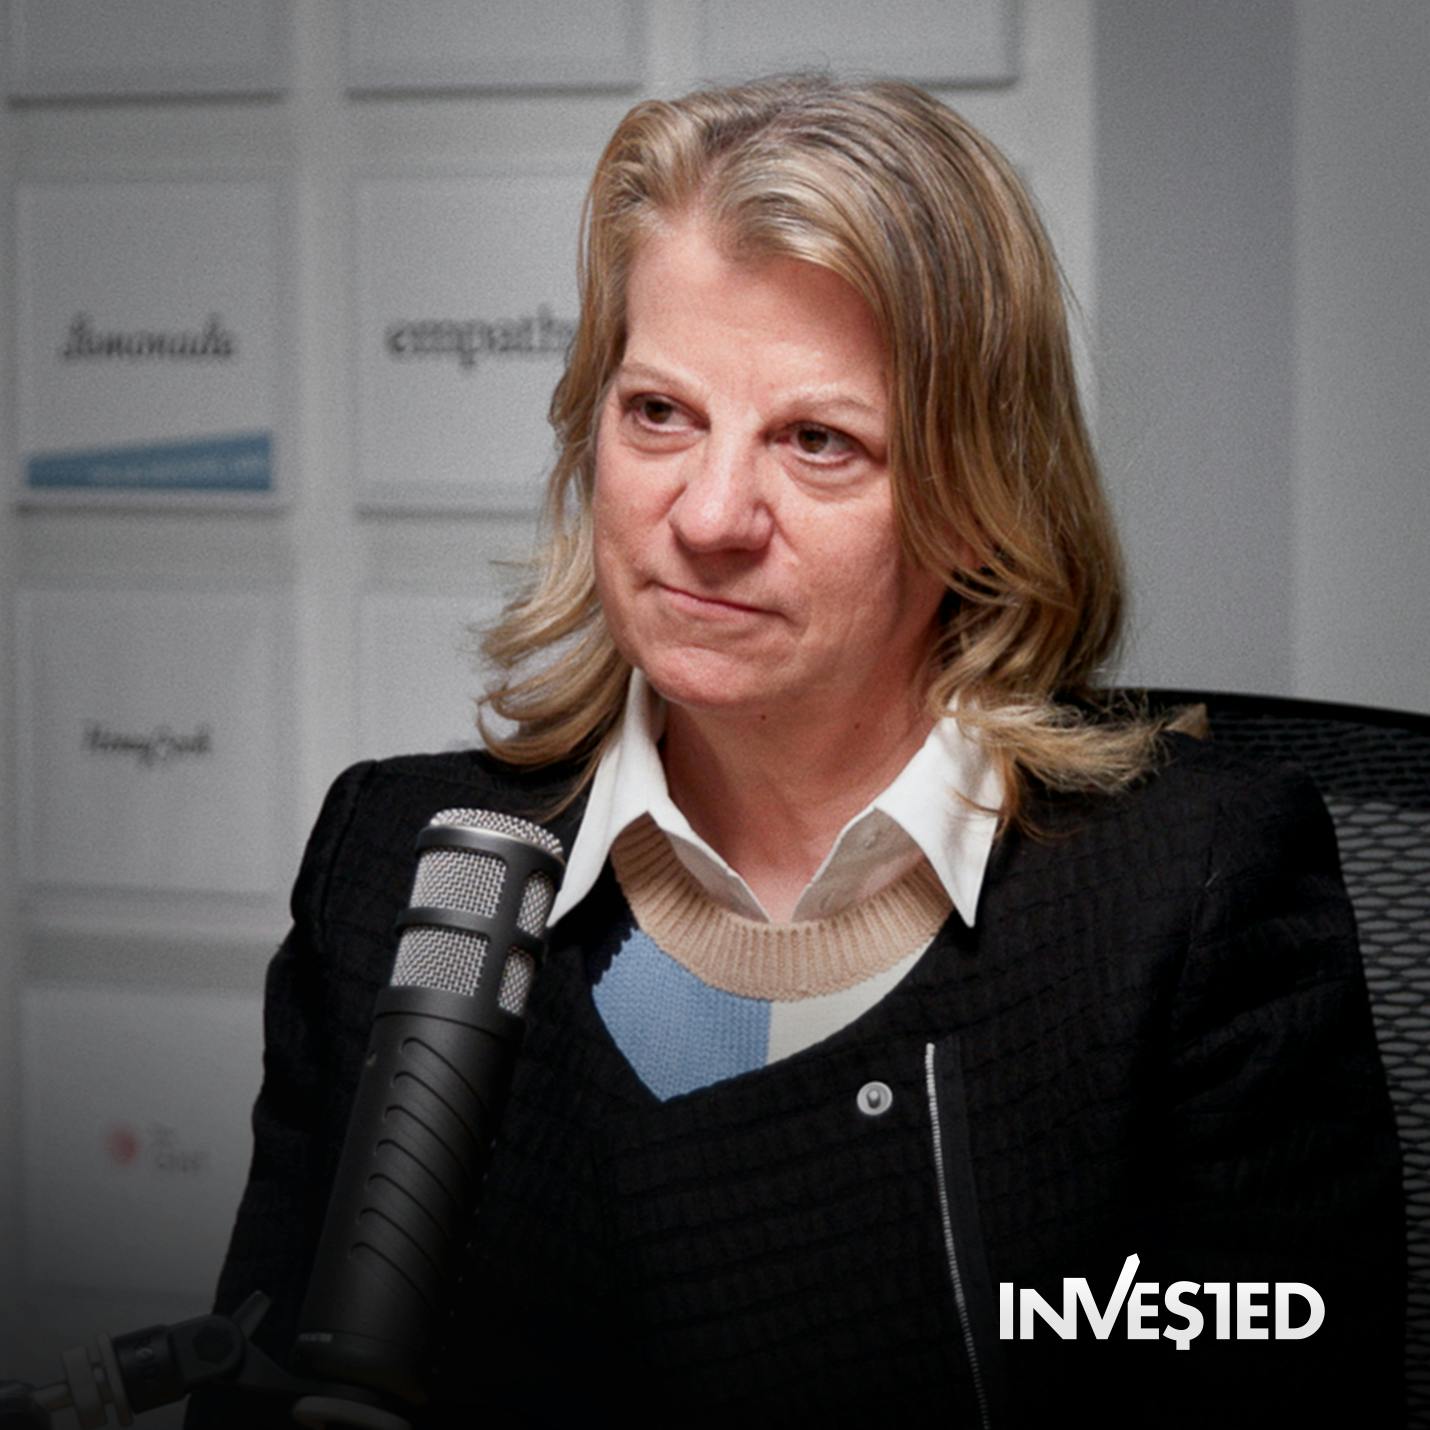 Kathryn Mayne on VC, Investing in People, Taking Risks and Why Israel is Special